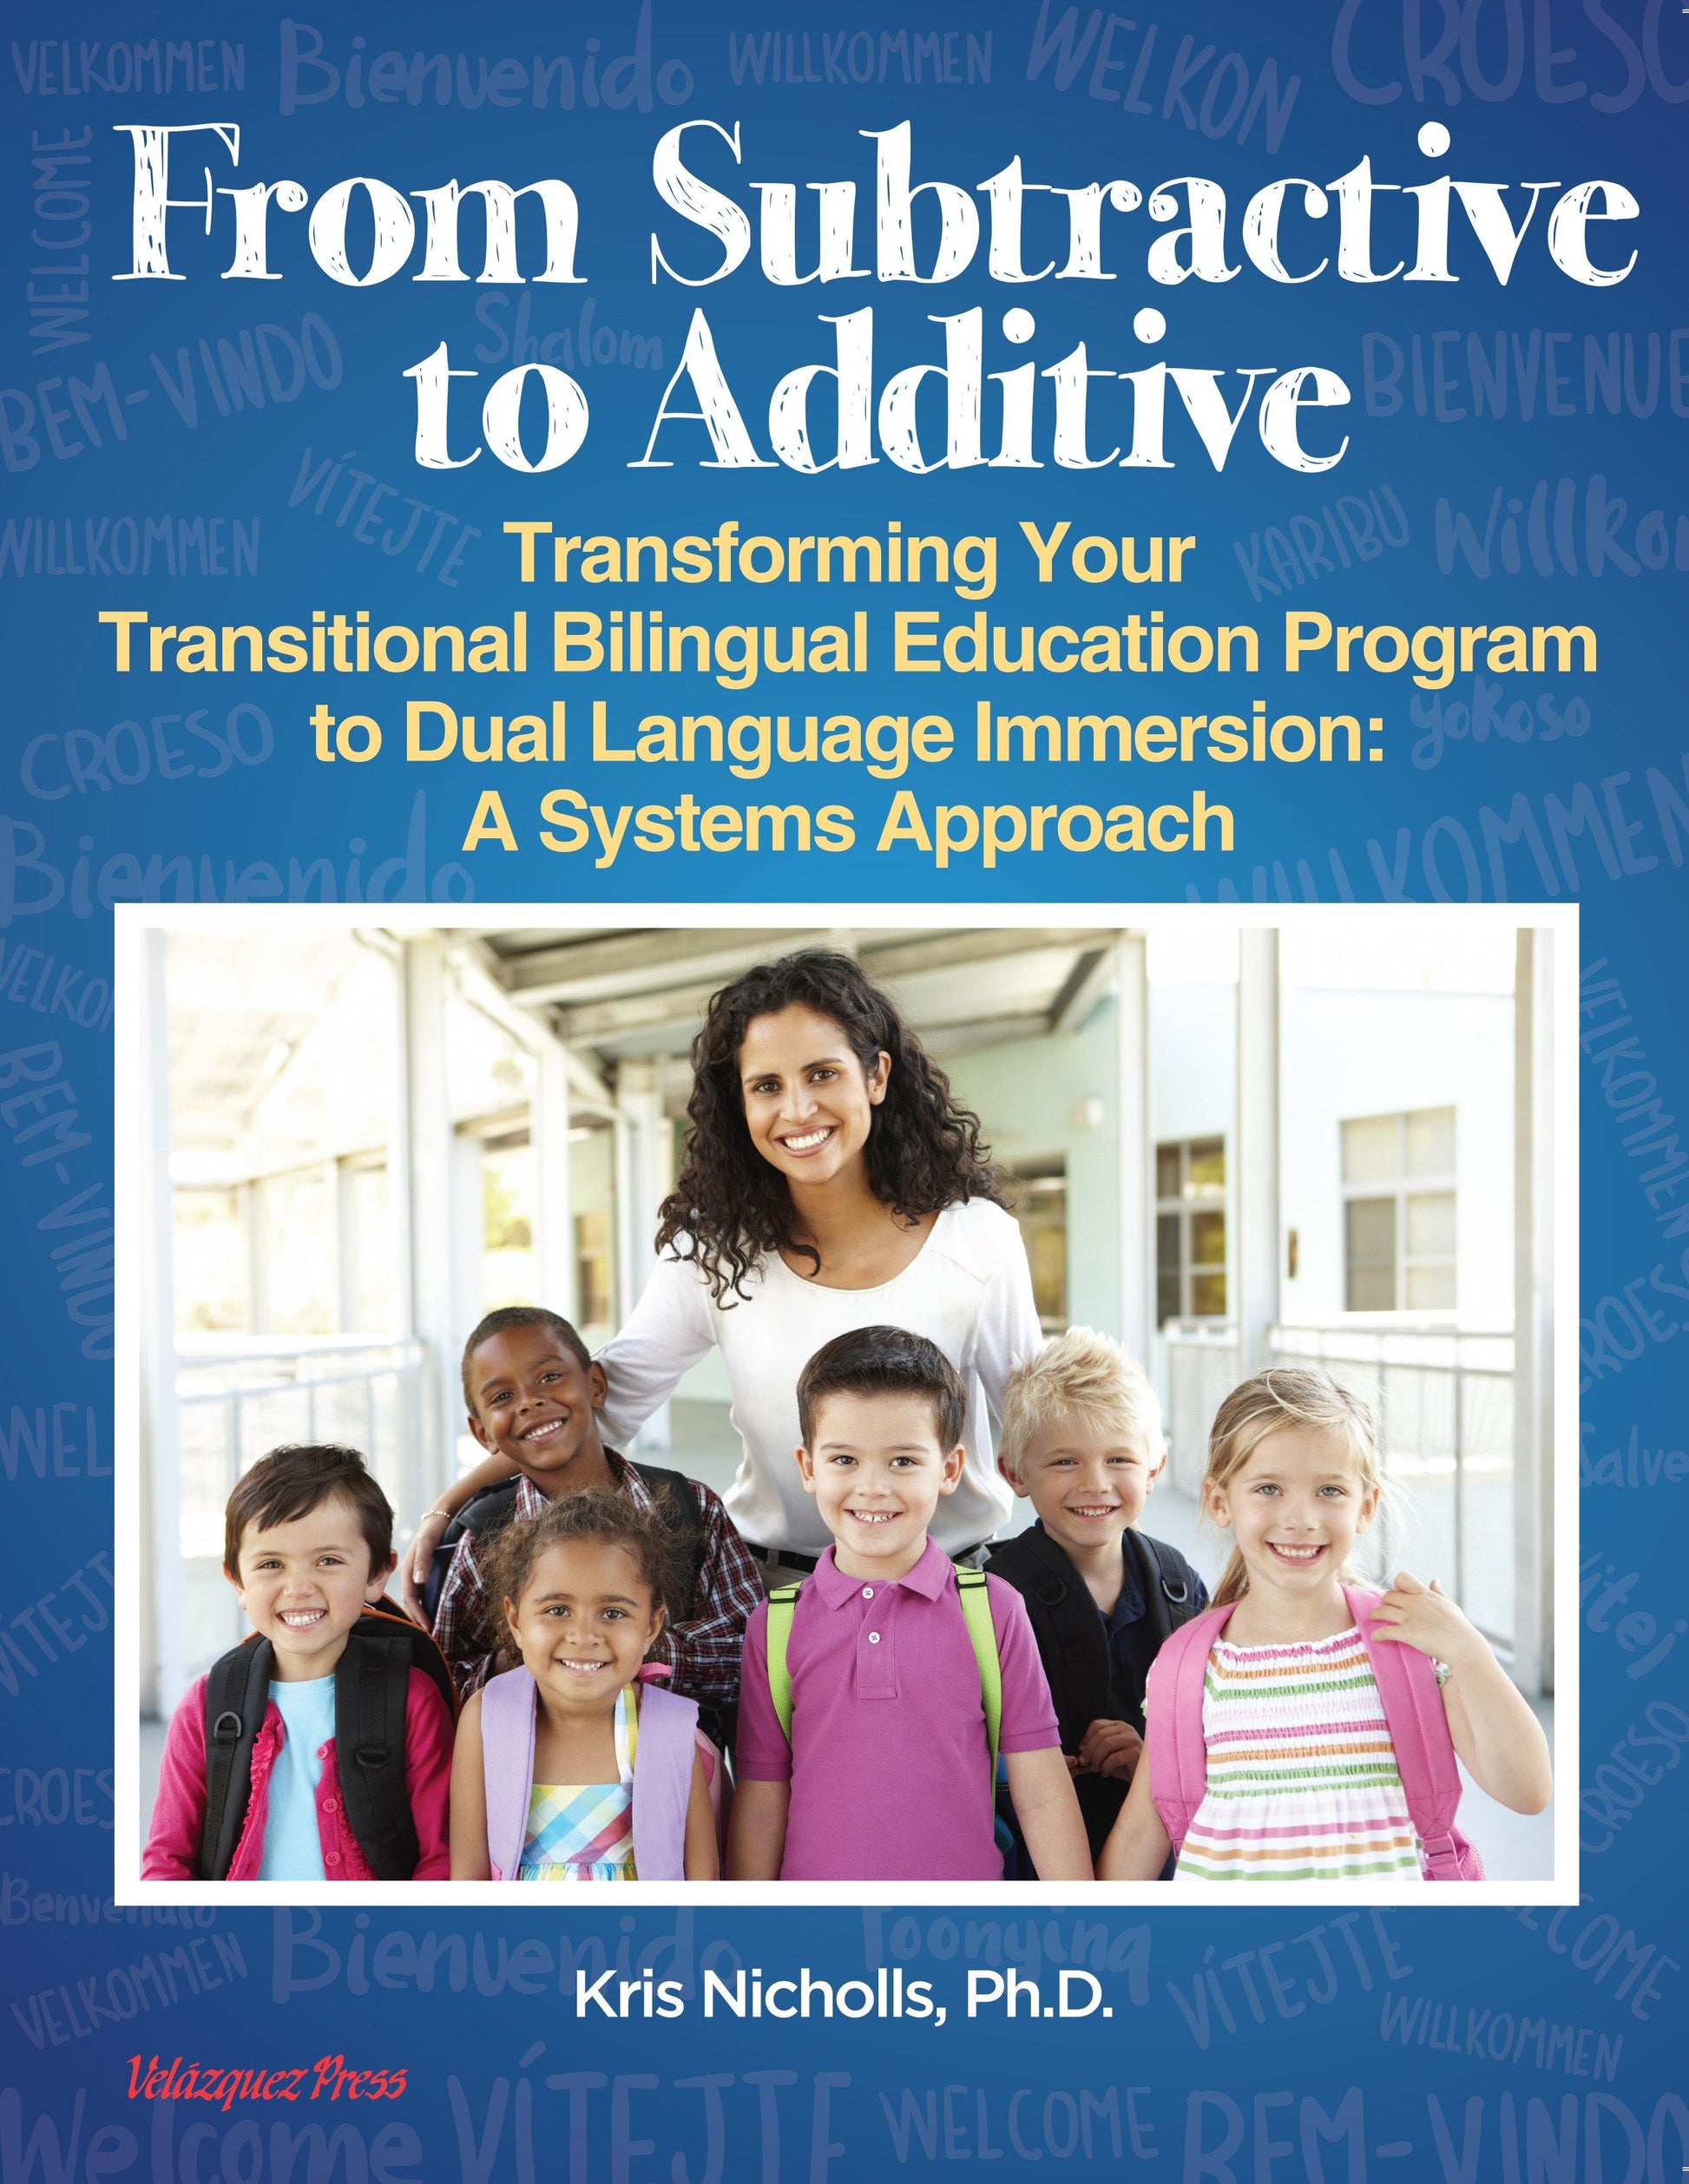 From Subtractive to Additive: Transforming Your Transitional Bilingual Education Program to Dual Language Immersion:  A Systems Approach - PREORDER - Velàzquez Press | Biliteracy